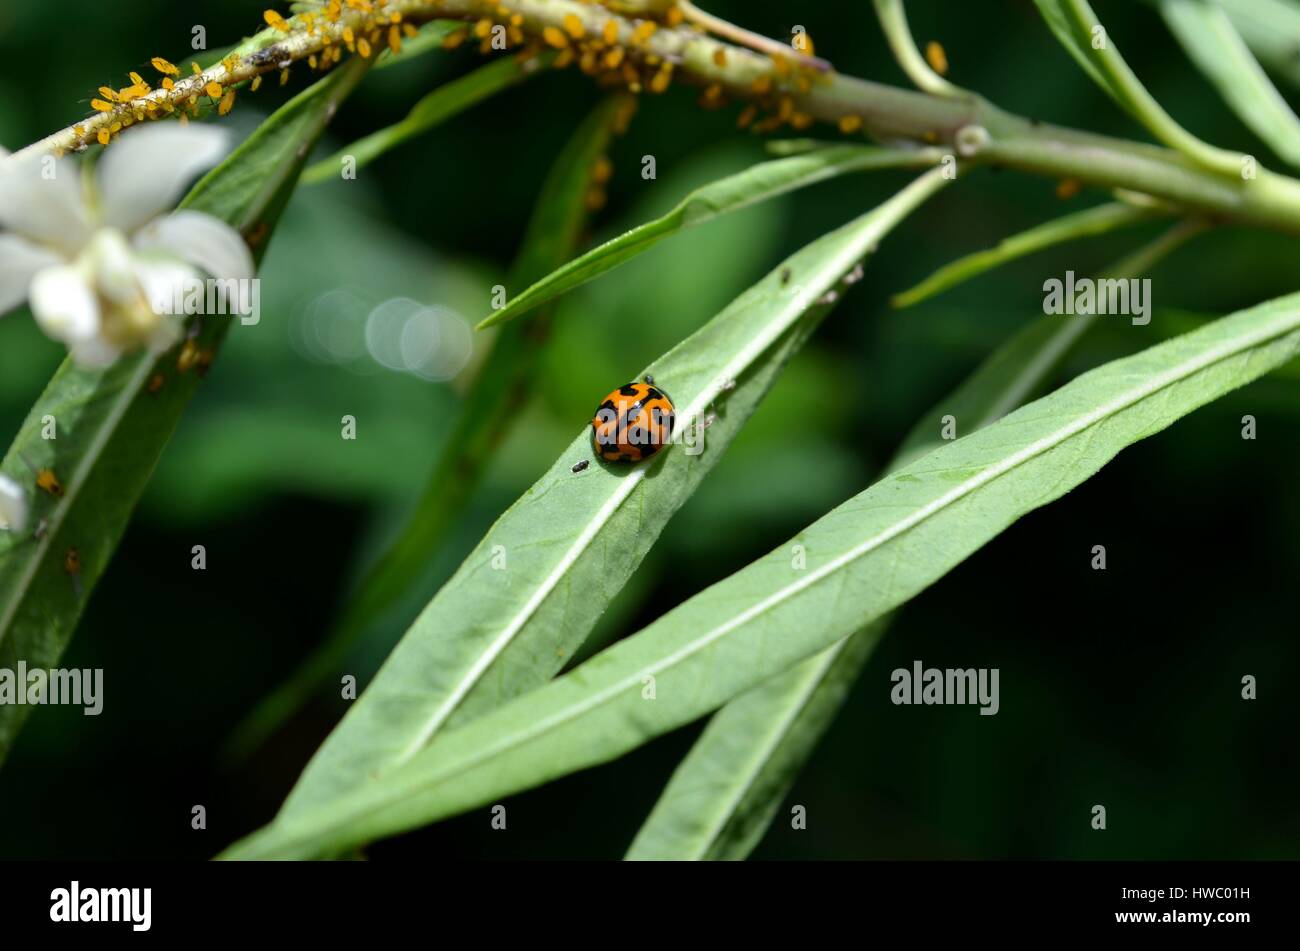 Lady bug on MIlkweed plant with a large supply of aphids to eat Stock Photo